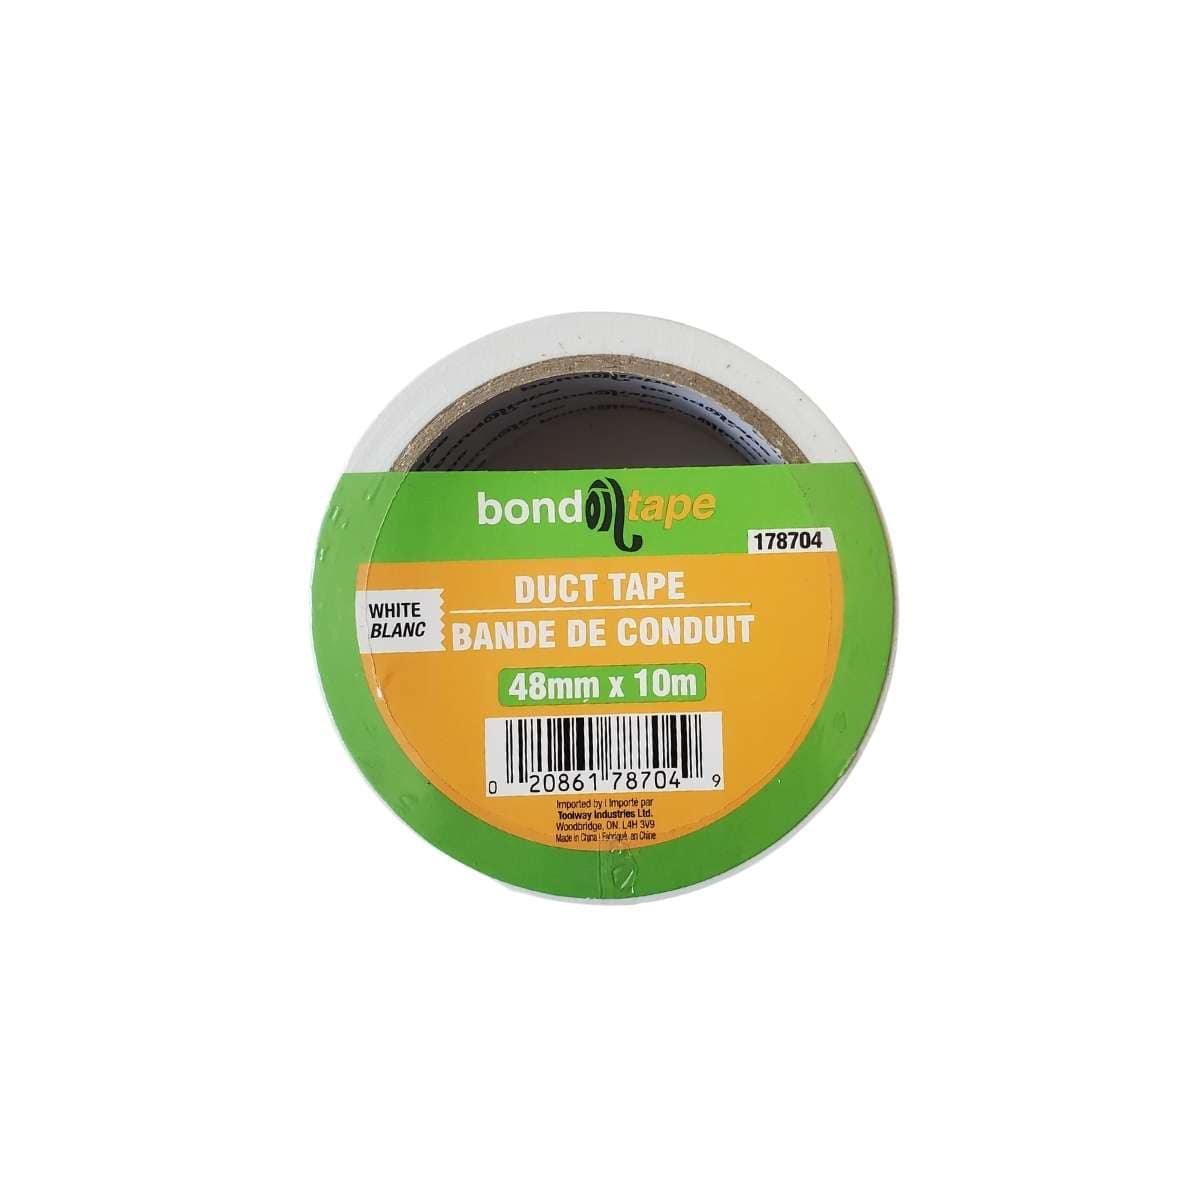 Toolway Duct Tape Bond Tape - Duct Tape - 48mm x 10m Roll - White - Item #178704